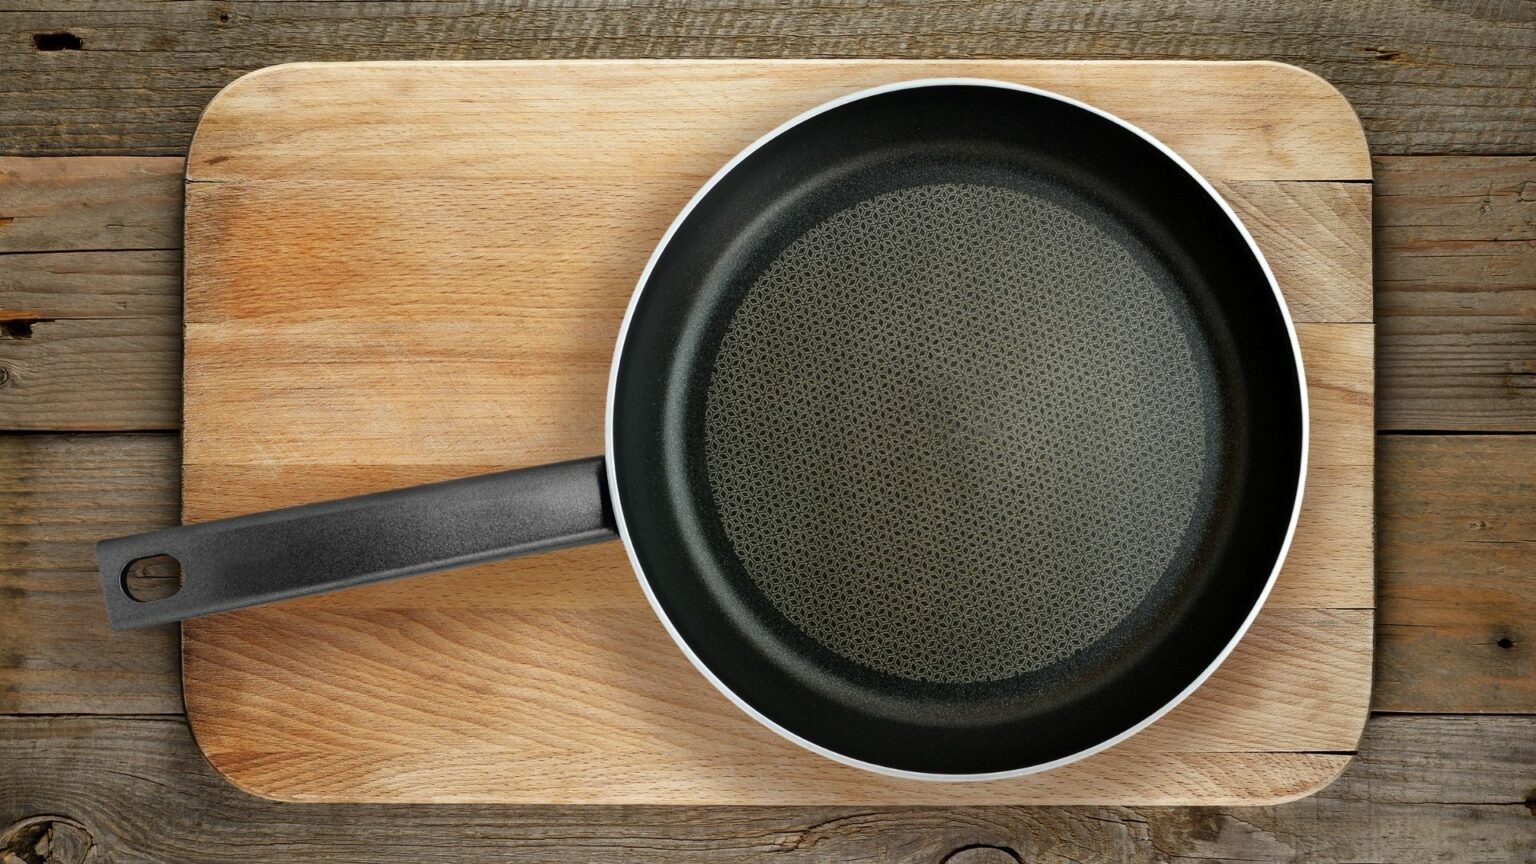 Advantages of The Frying Pan With Purpose